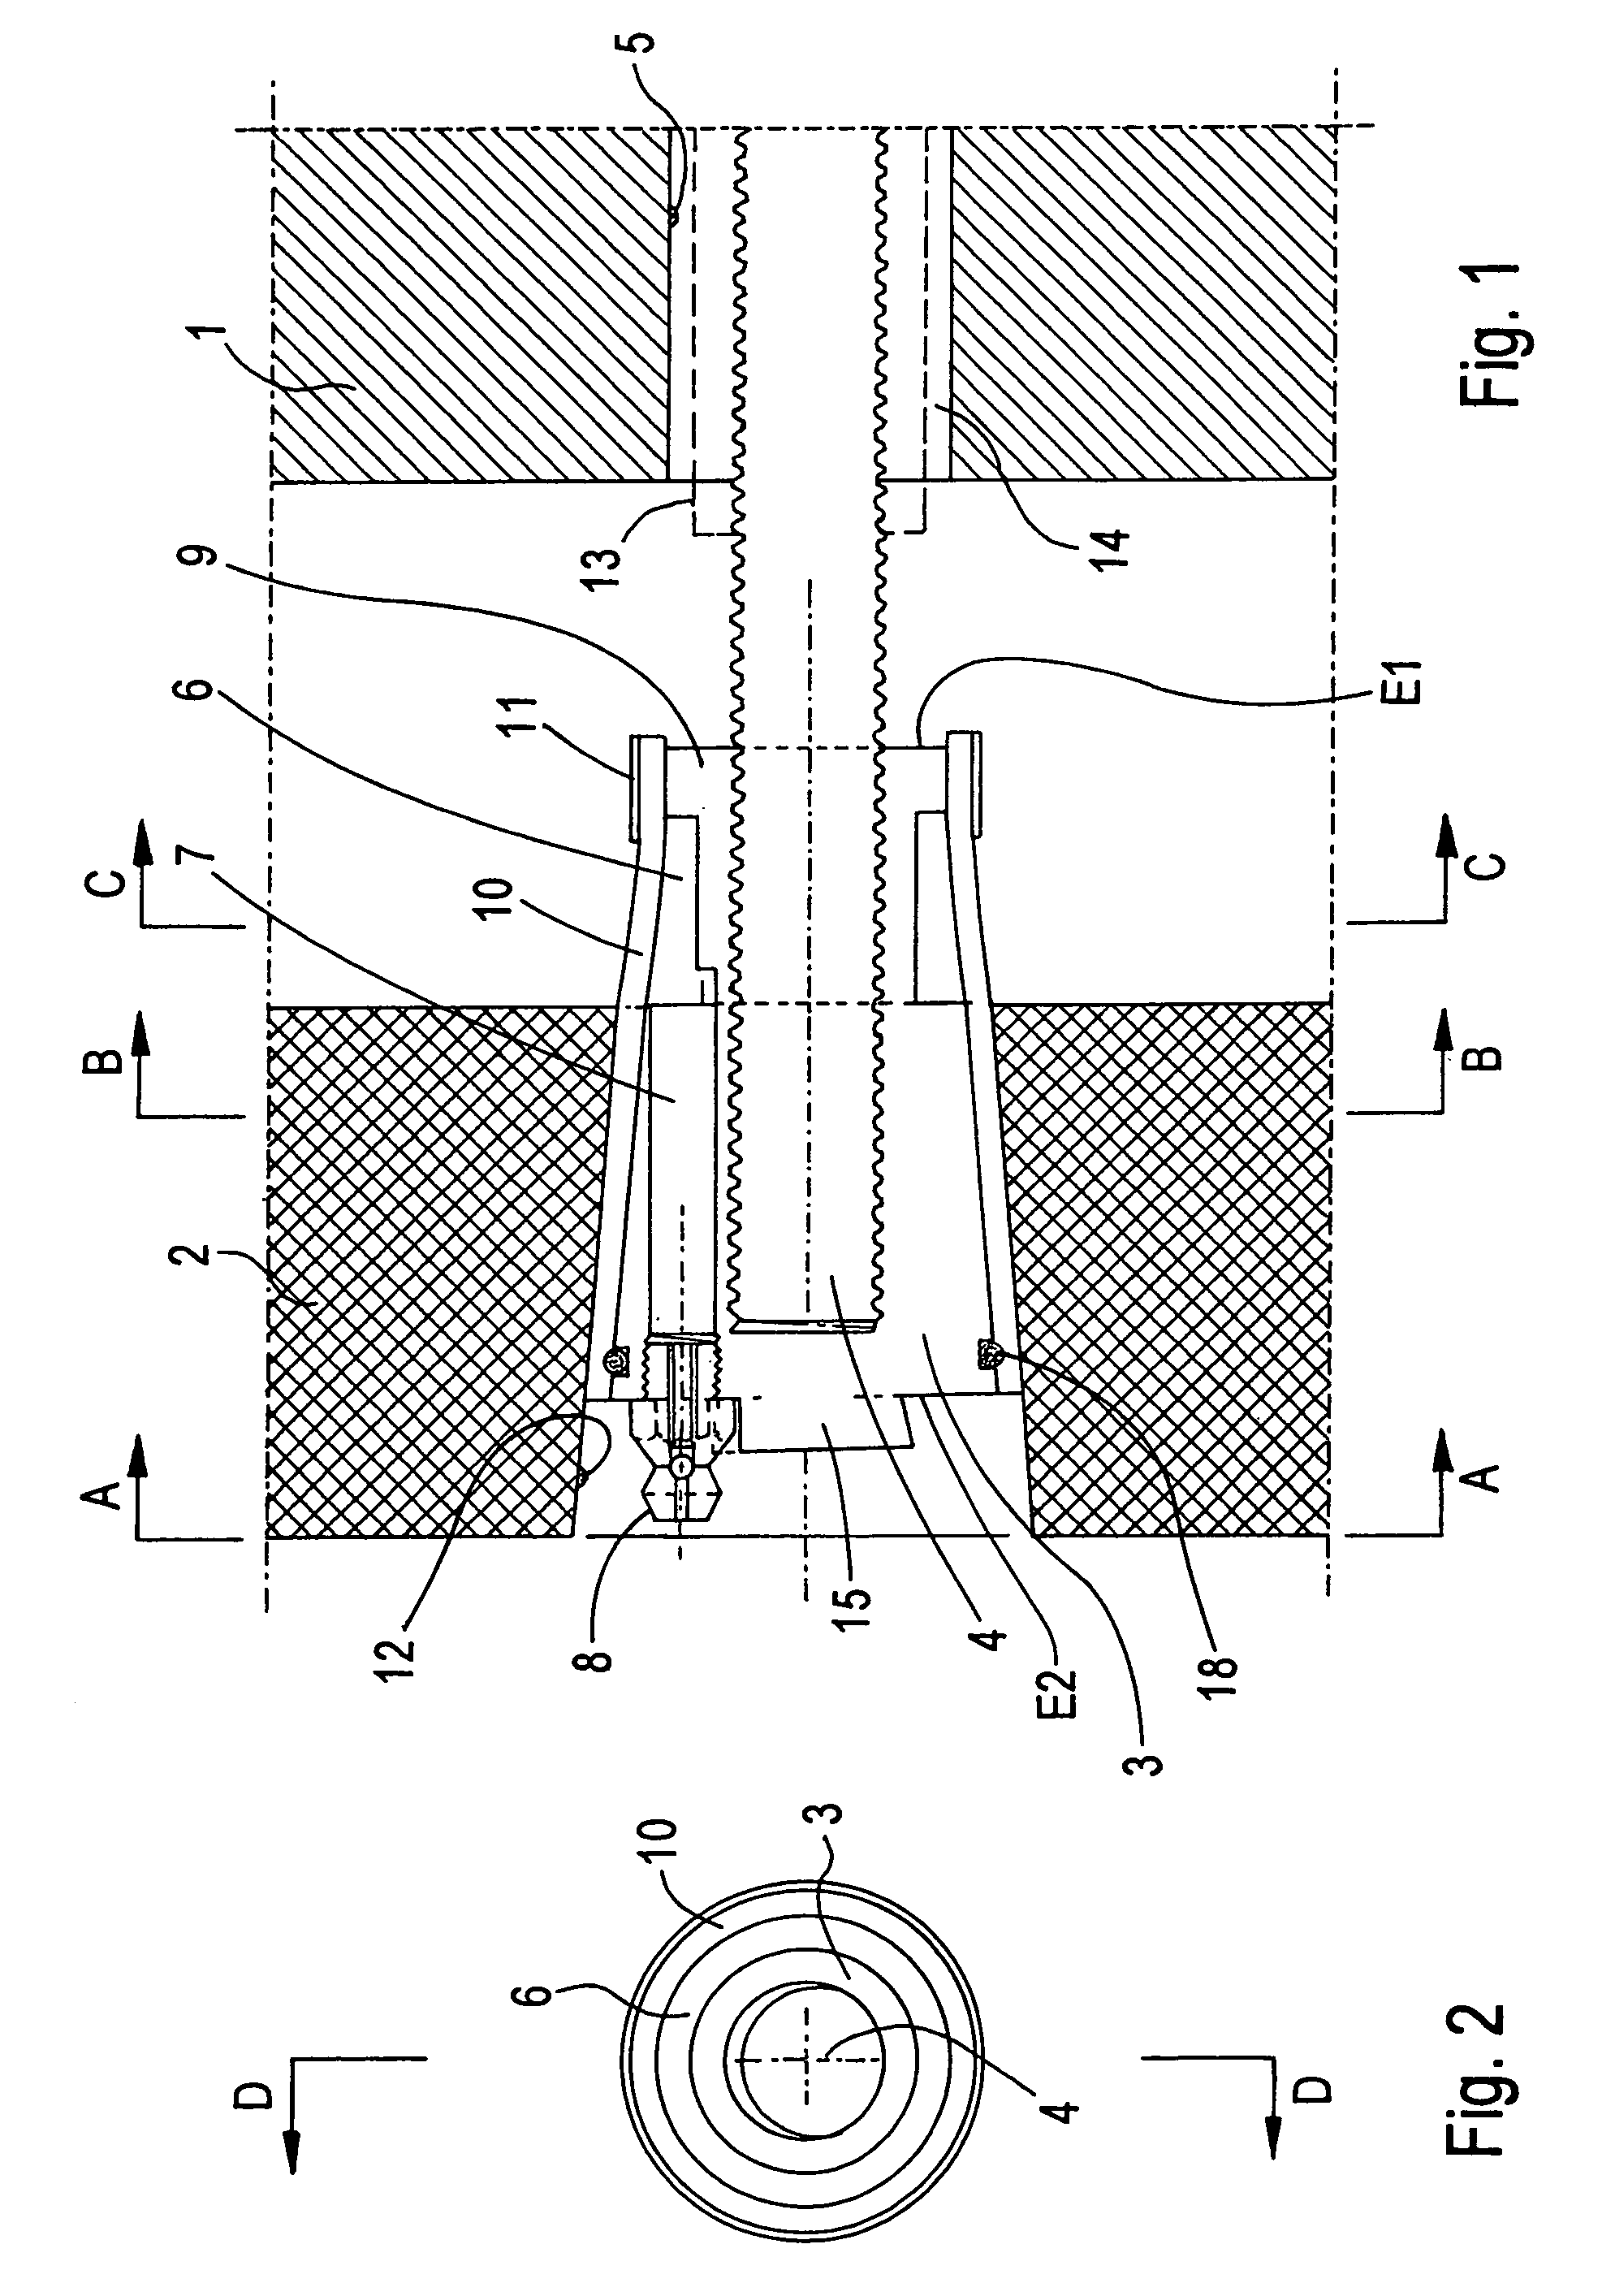 Device and method for fastening facade plates